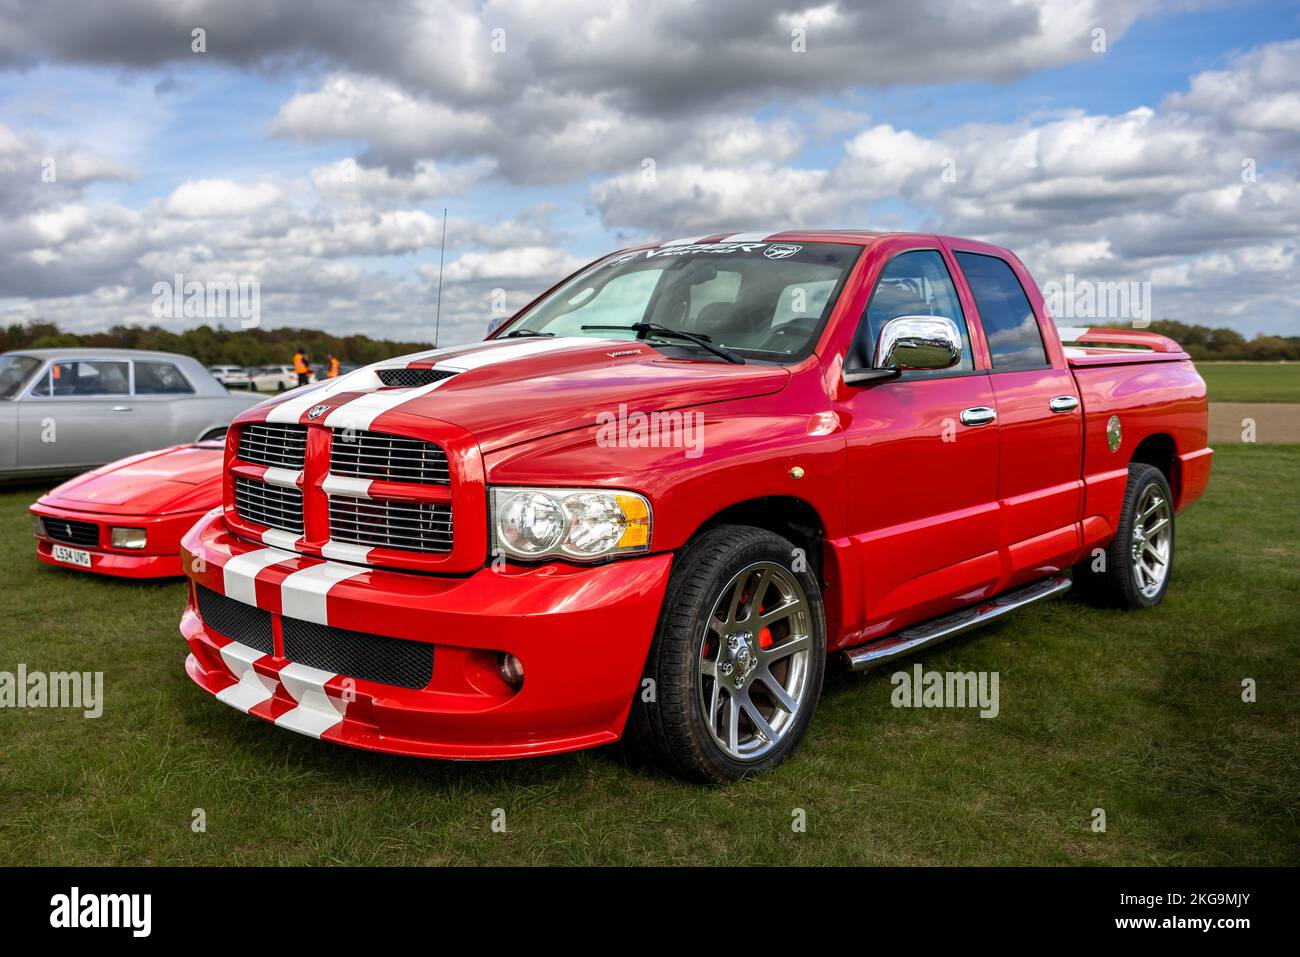 2005 Dodge Ram SRT-10 sport pickup truck ‘KM54 RAM’ on display at the October Scramble held at the Bicester Heritage Centre on the 9th October 2022 Stock Photo